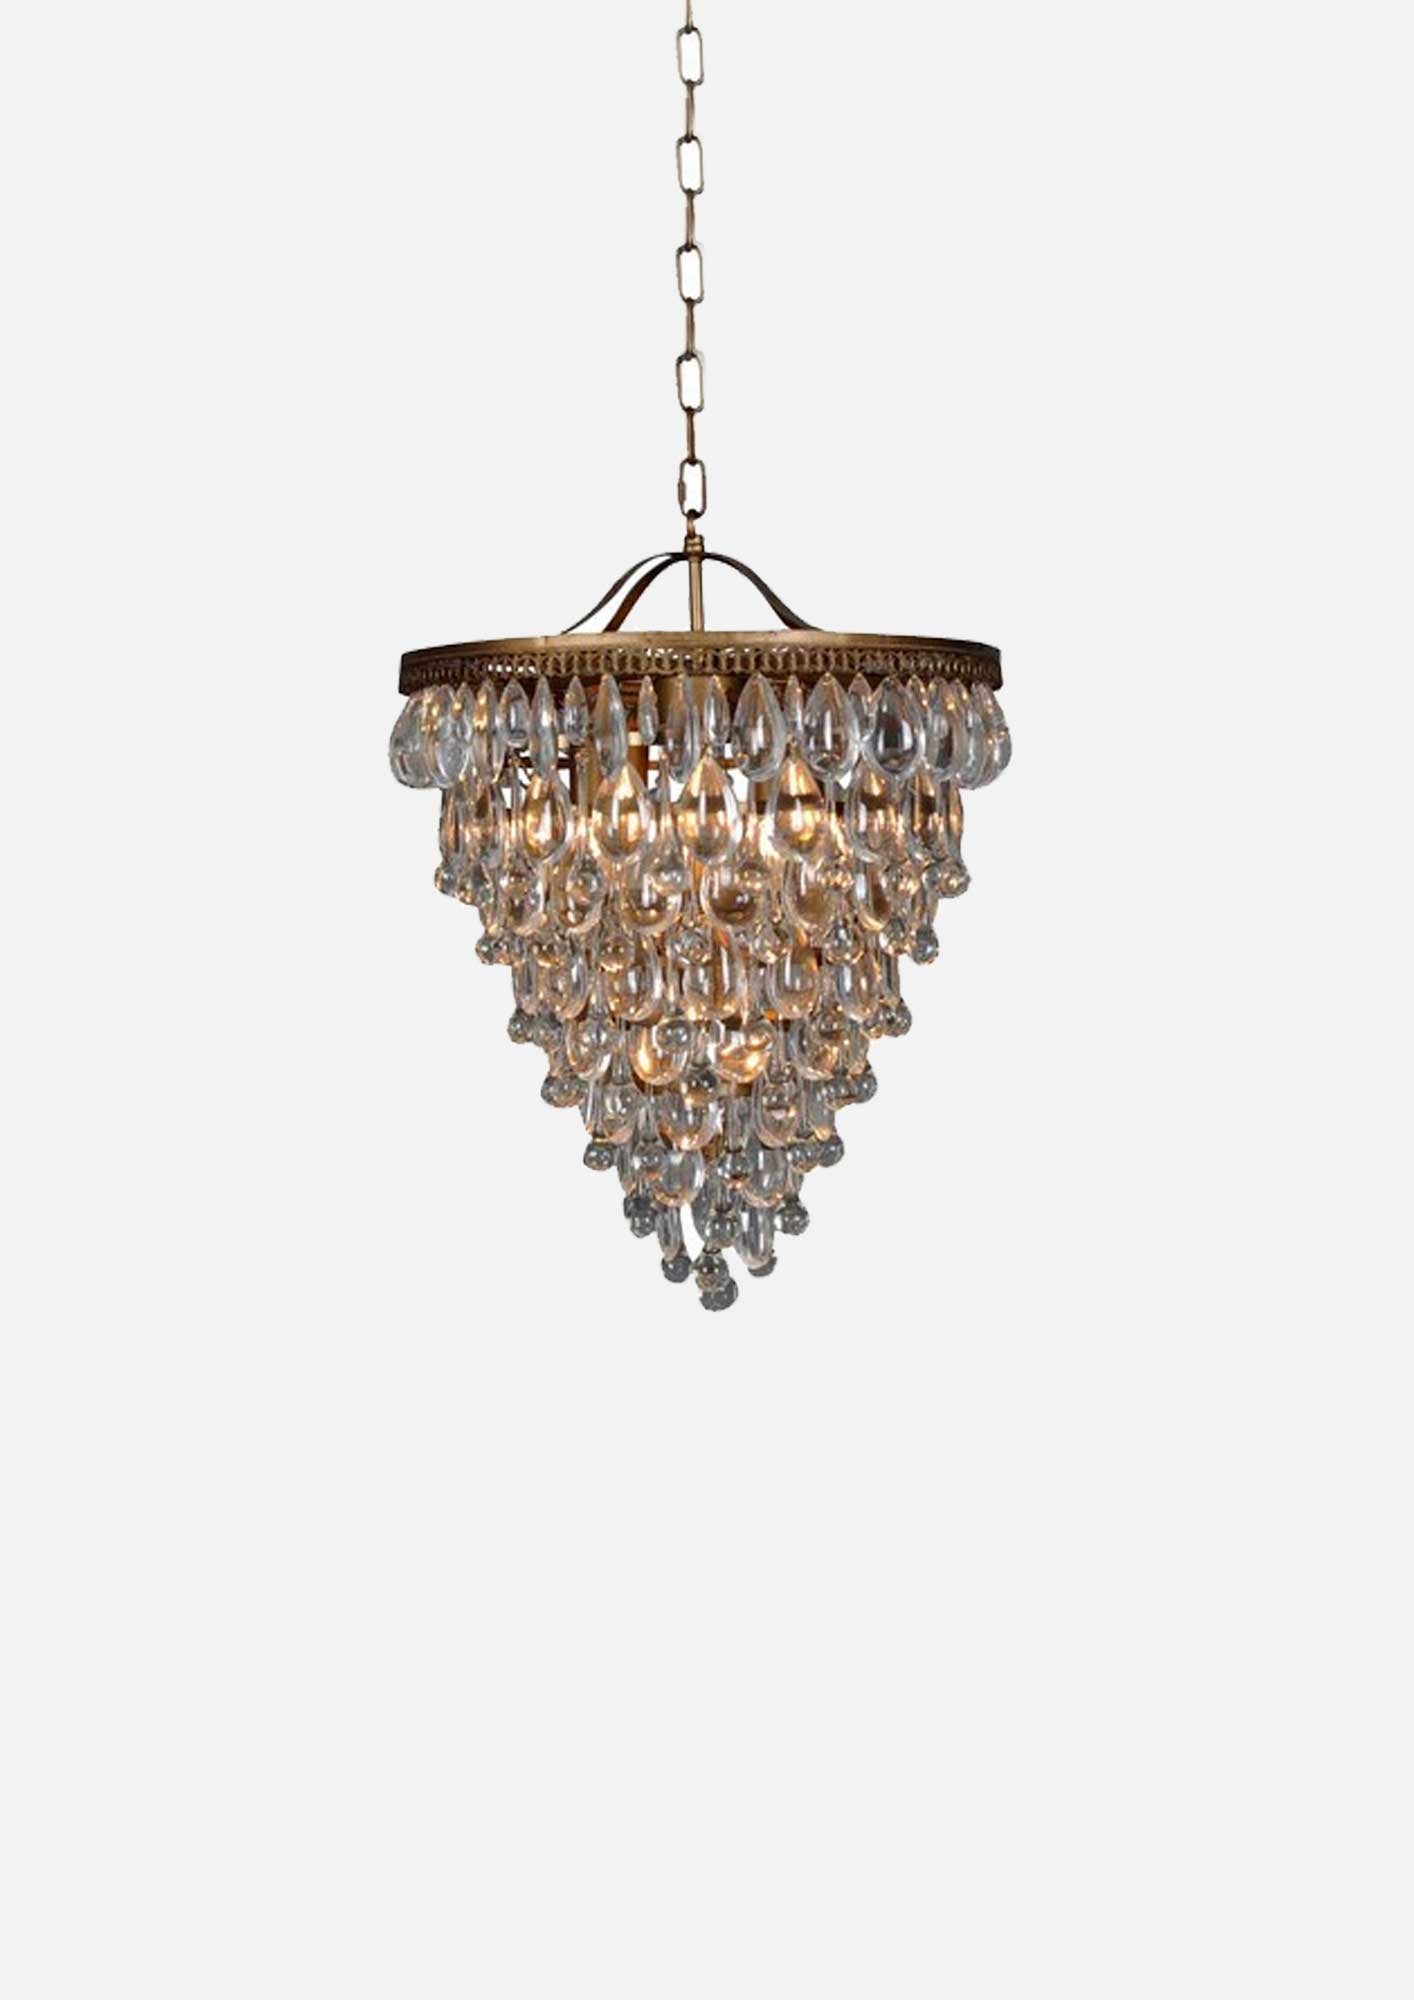 Chandelier with Hanging Drops